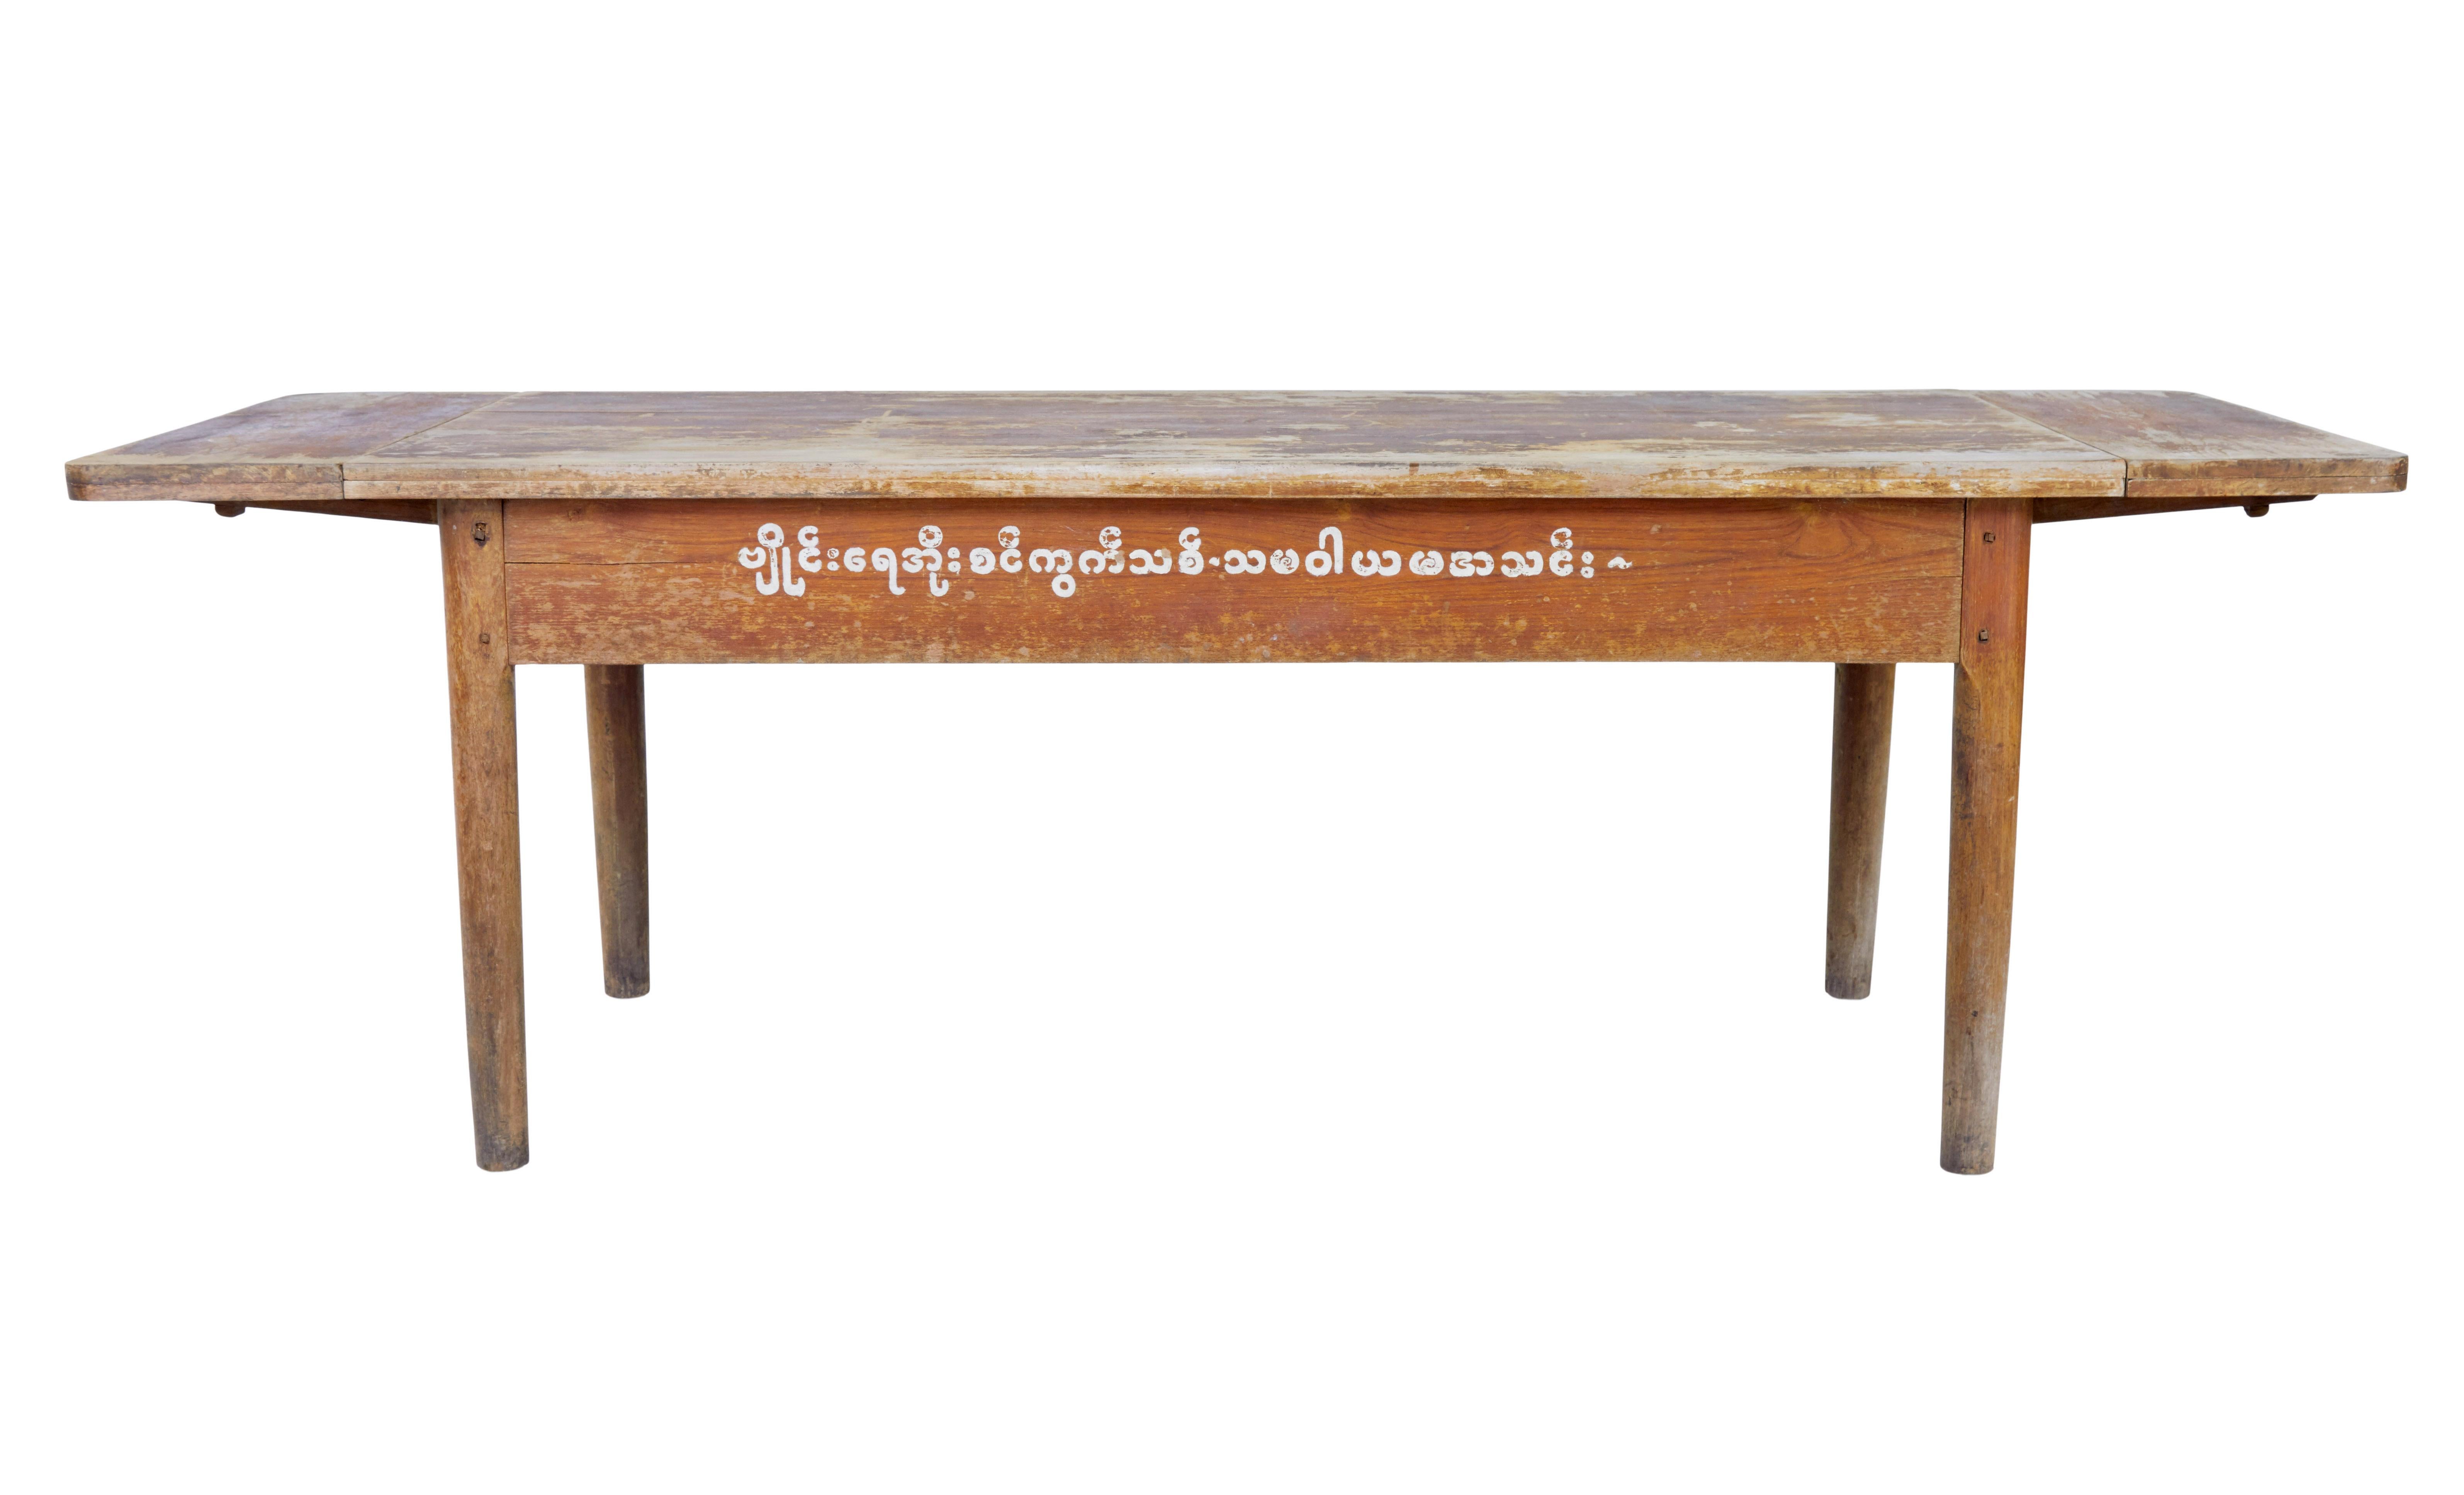 19th century burmese painted teak village table circa 1890.

Rare table from myanmar (formerly burma) .  This table was from a village where the elders would gather round to discuss local issues.  Hand painted on the side, which roughly translates